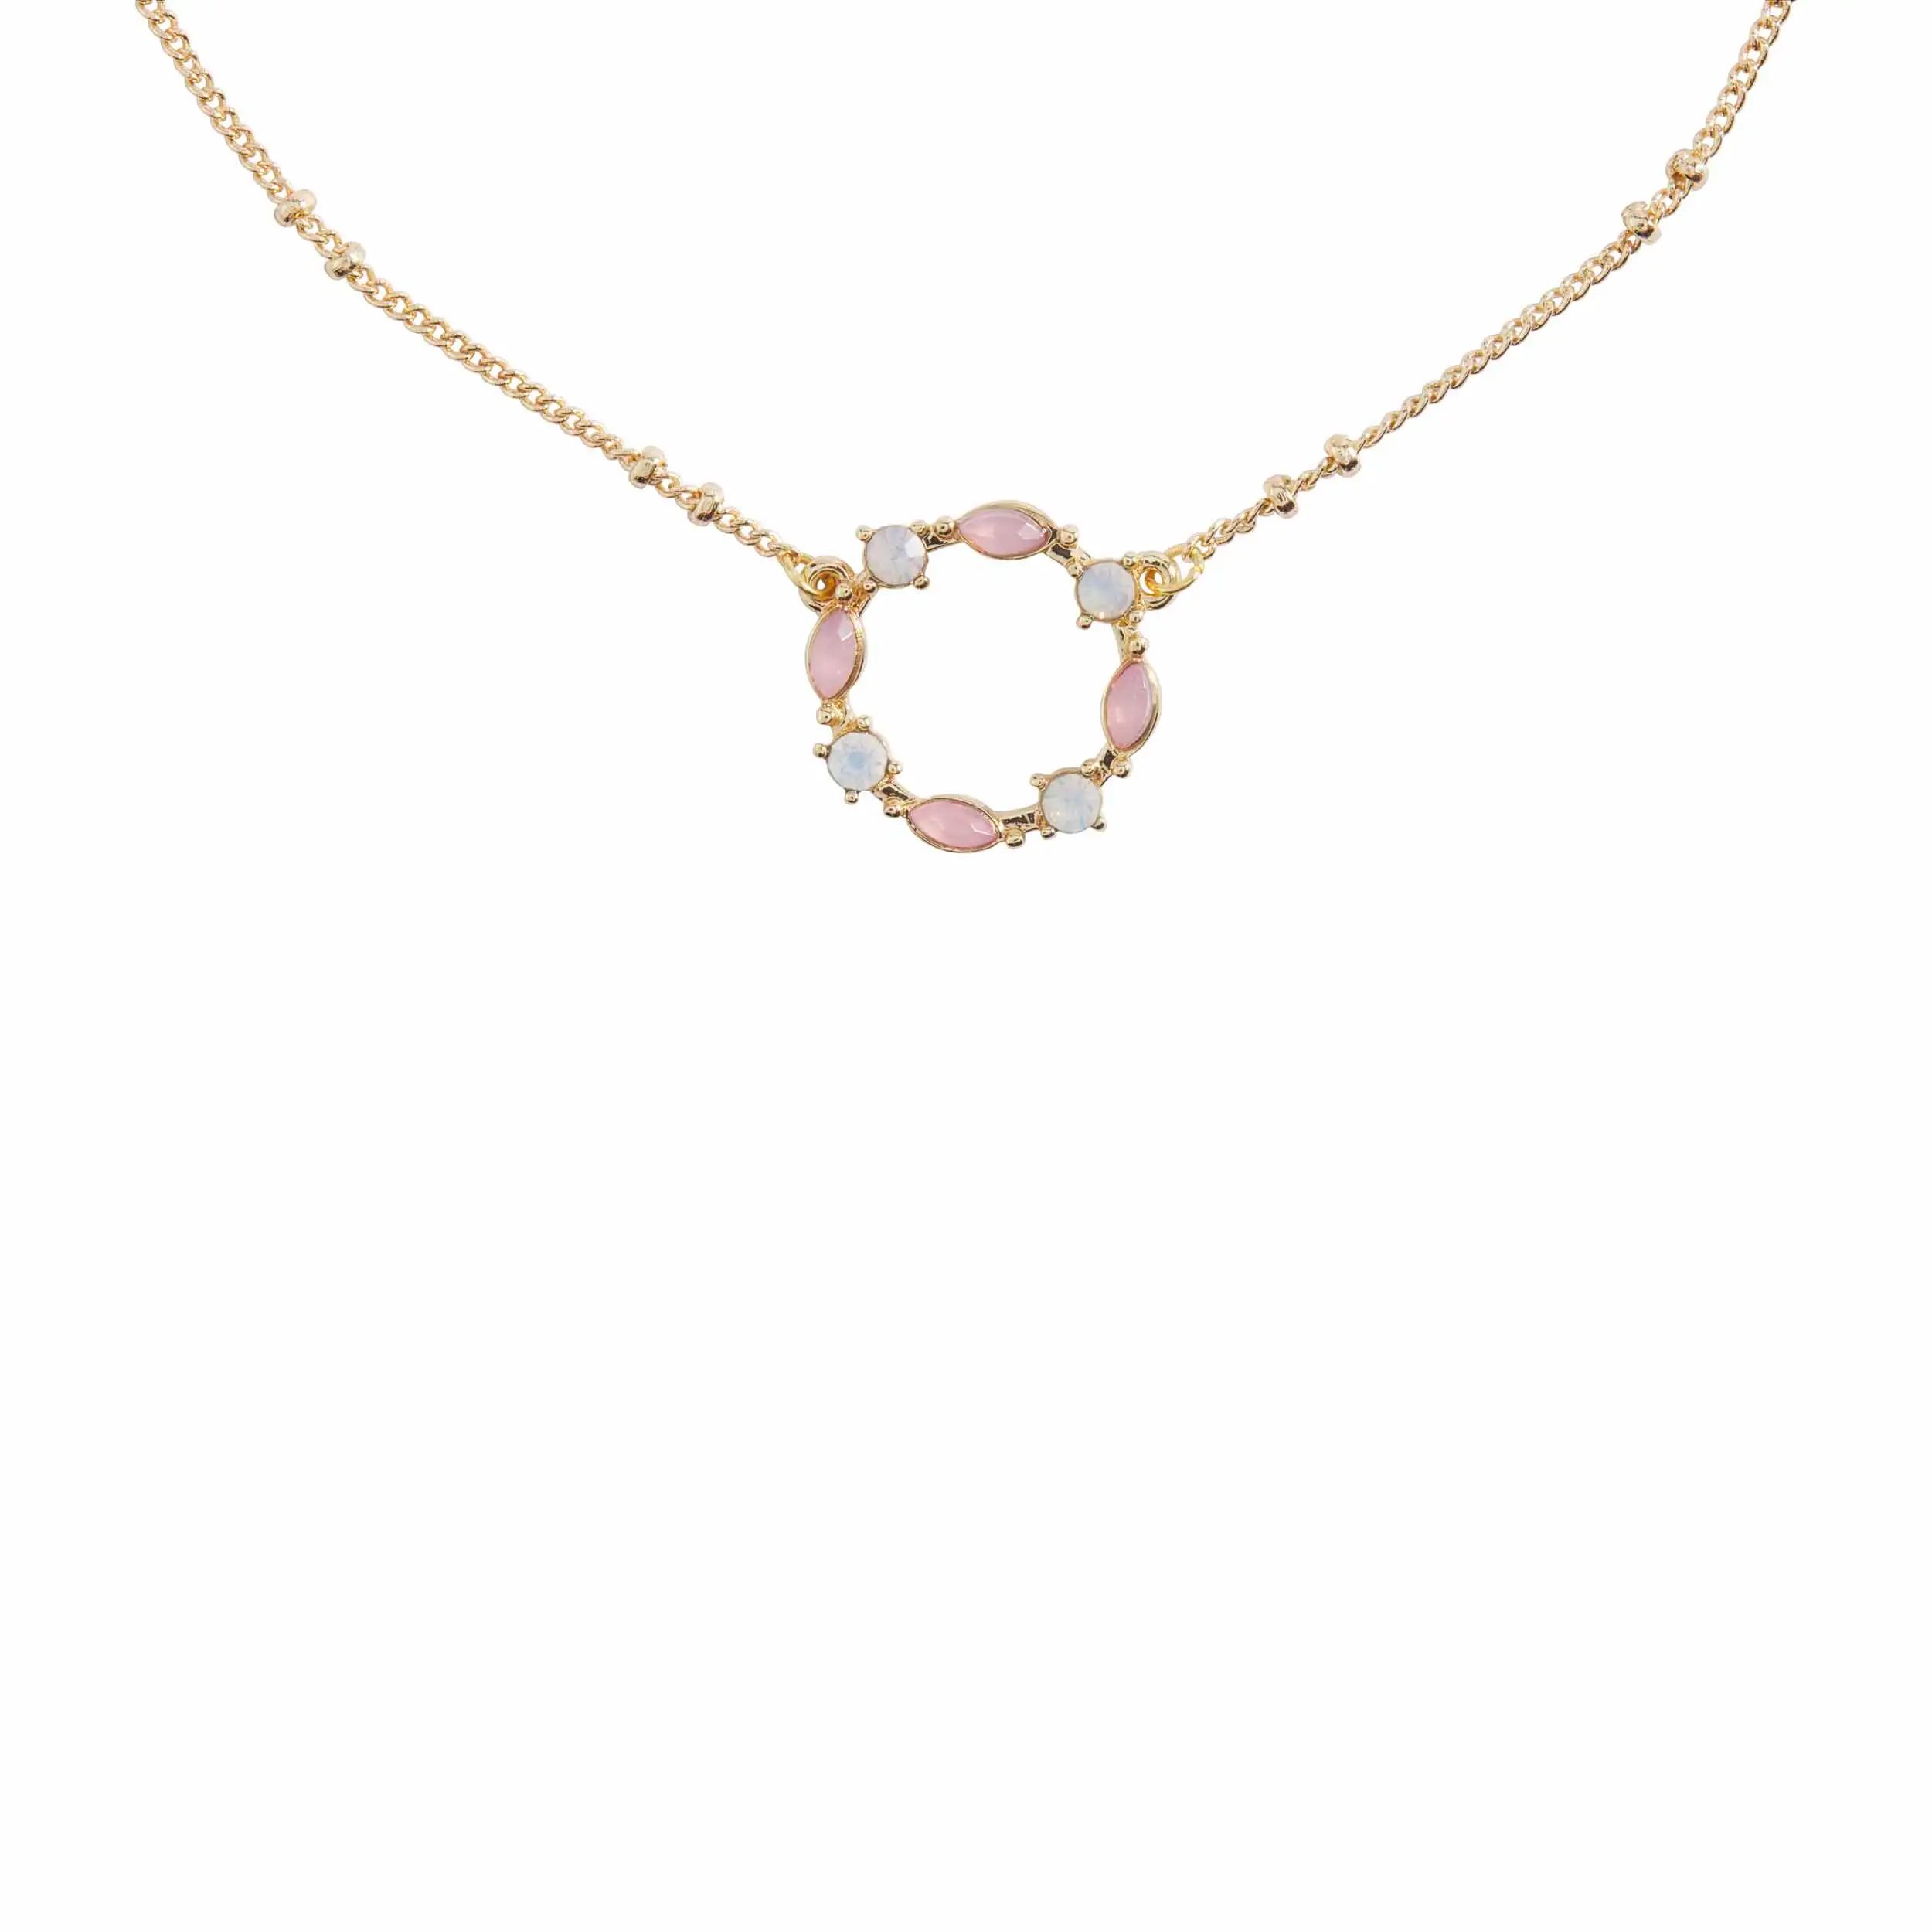 Opal stone necklace holiday ornament | Mud Pie (US)